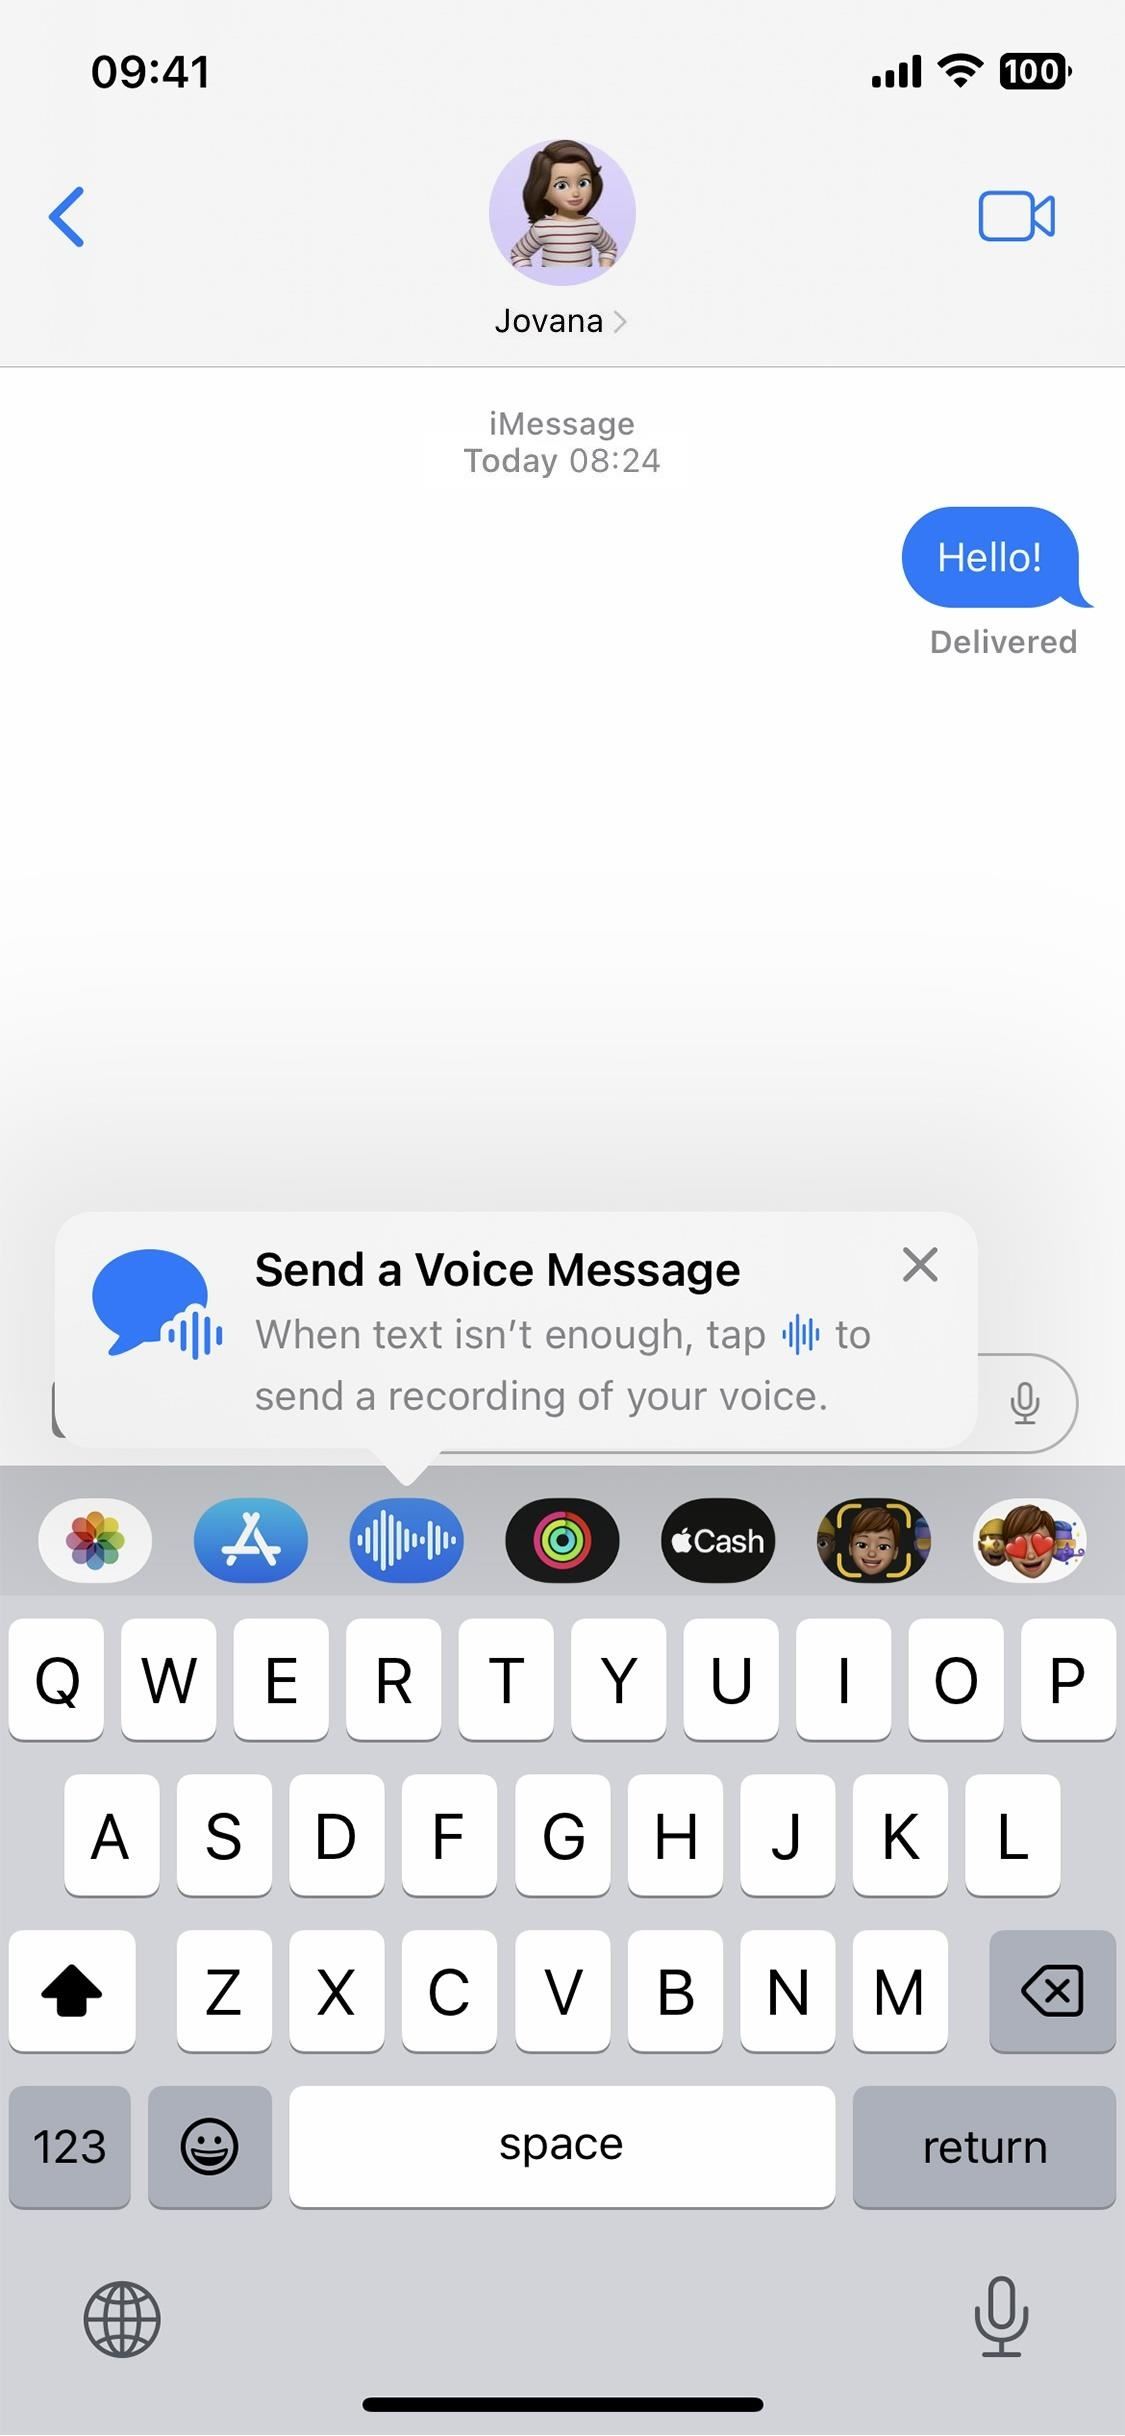 iOS 16 changed how voice messages are recorded and sent on the iPhone — here's how it works now